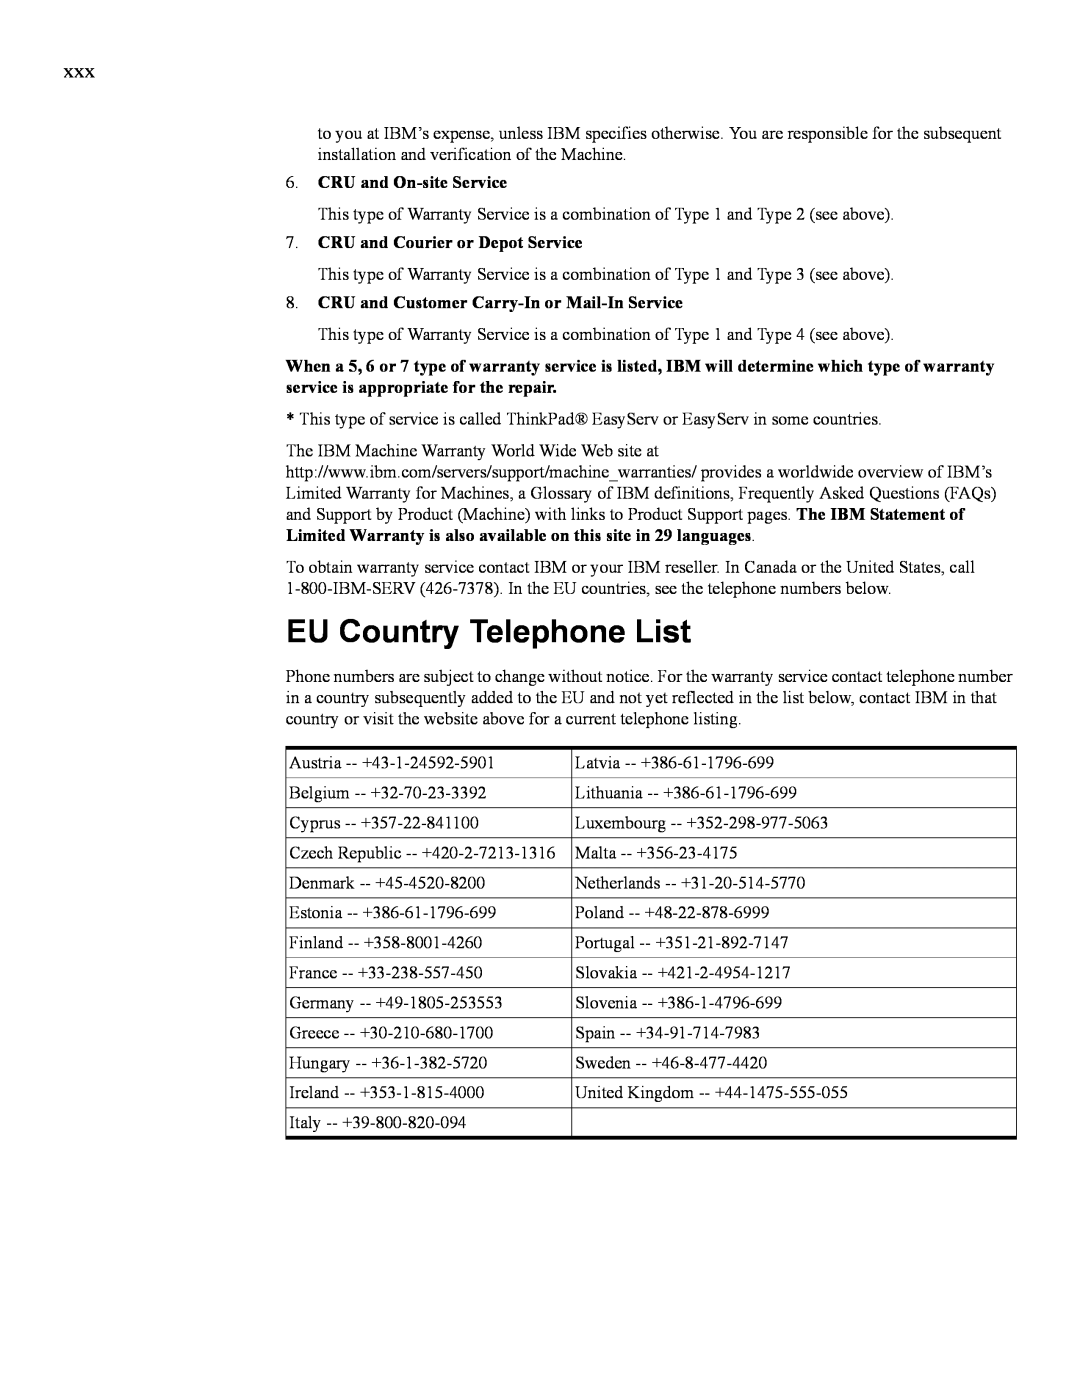 IBM 24R9718 IB manual EU Country Telephone List, CRU and On-site Service, CRU and Courier or Depot Service 